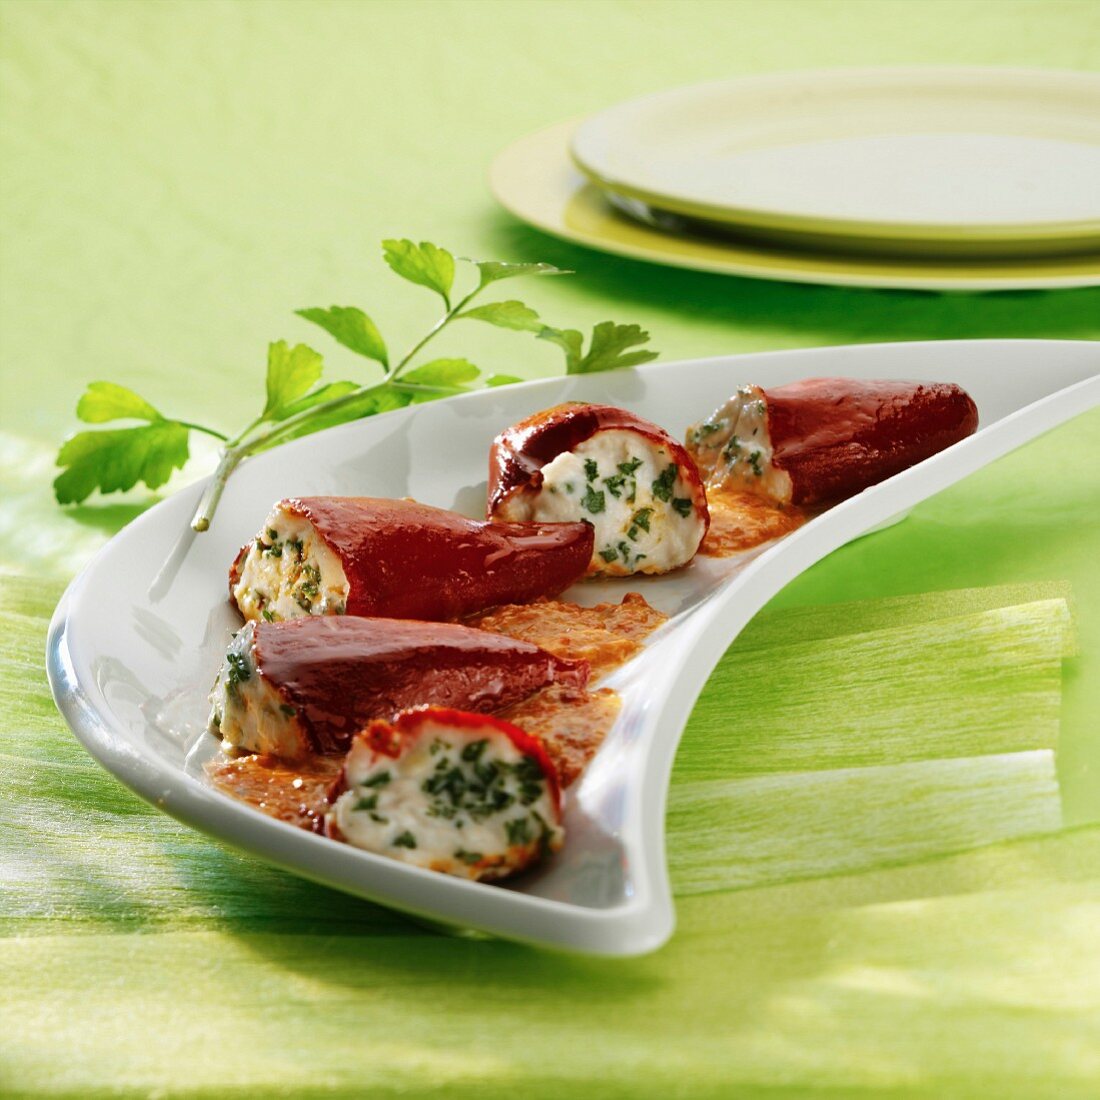 Stuffed piquillo peppers with cream cheese